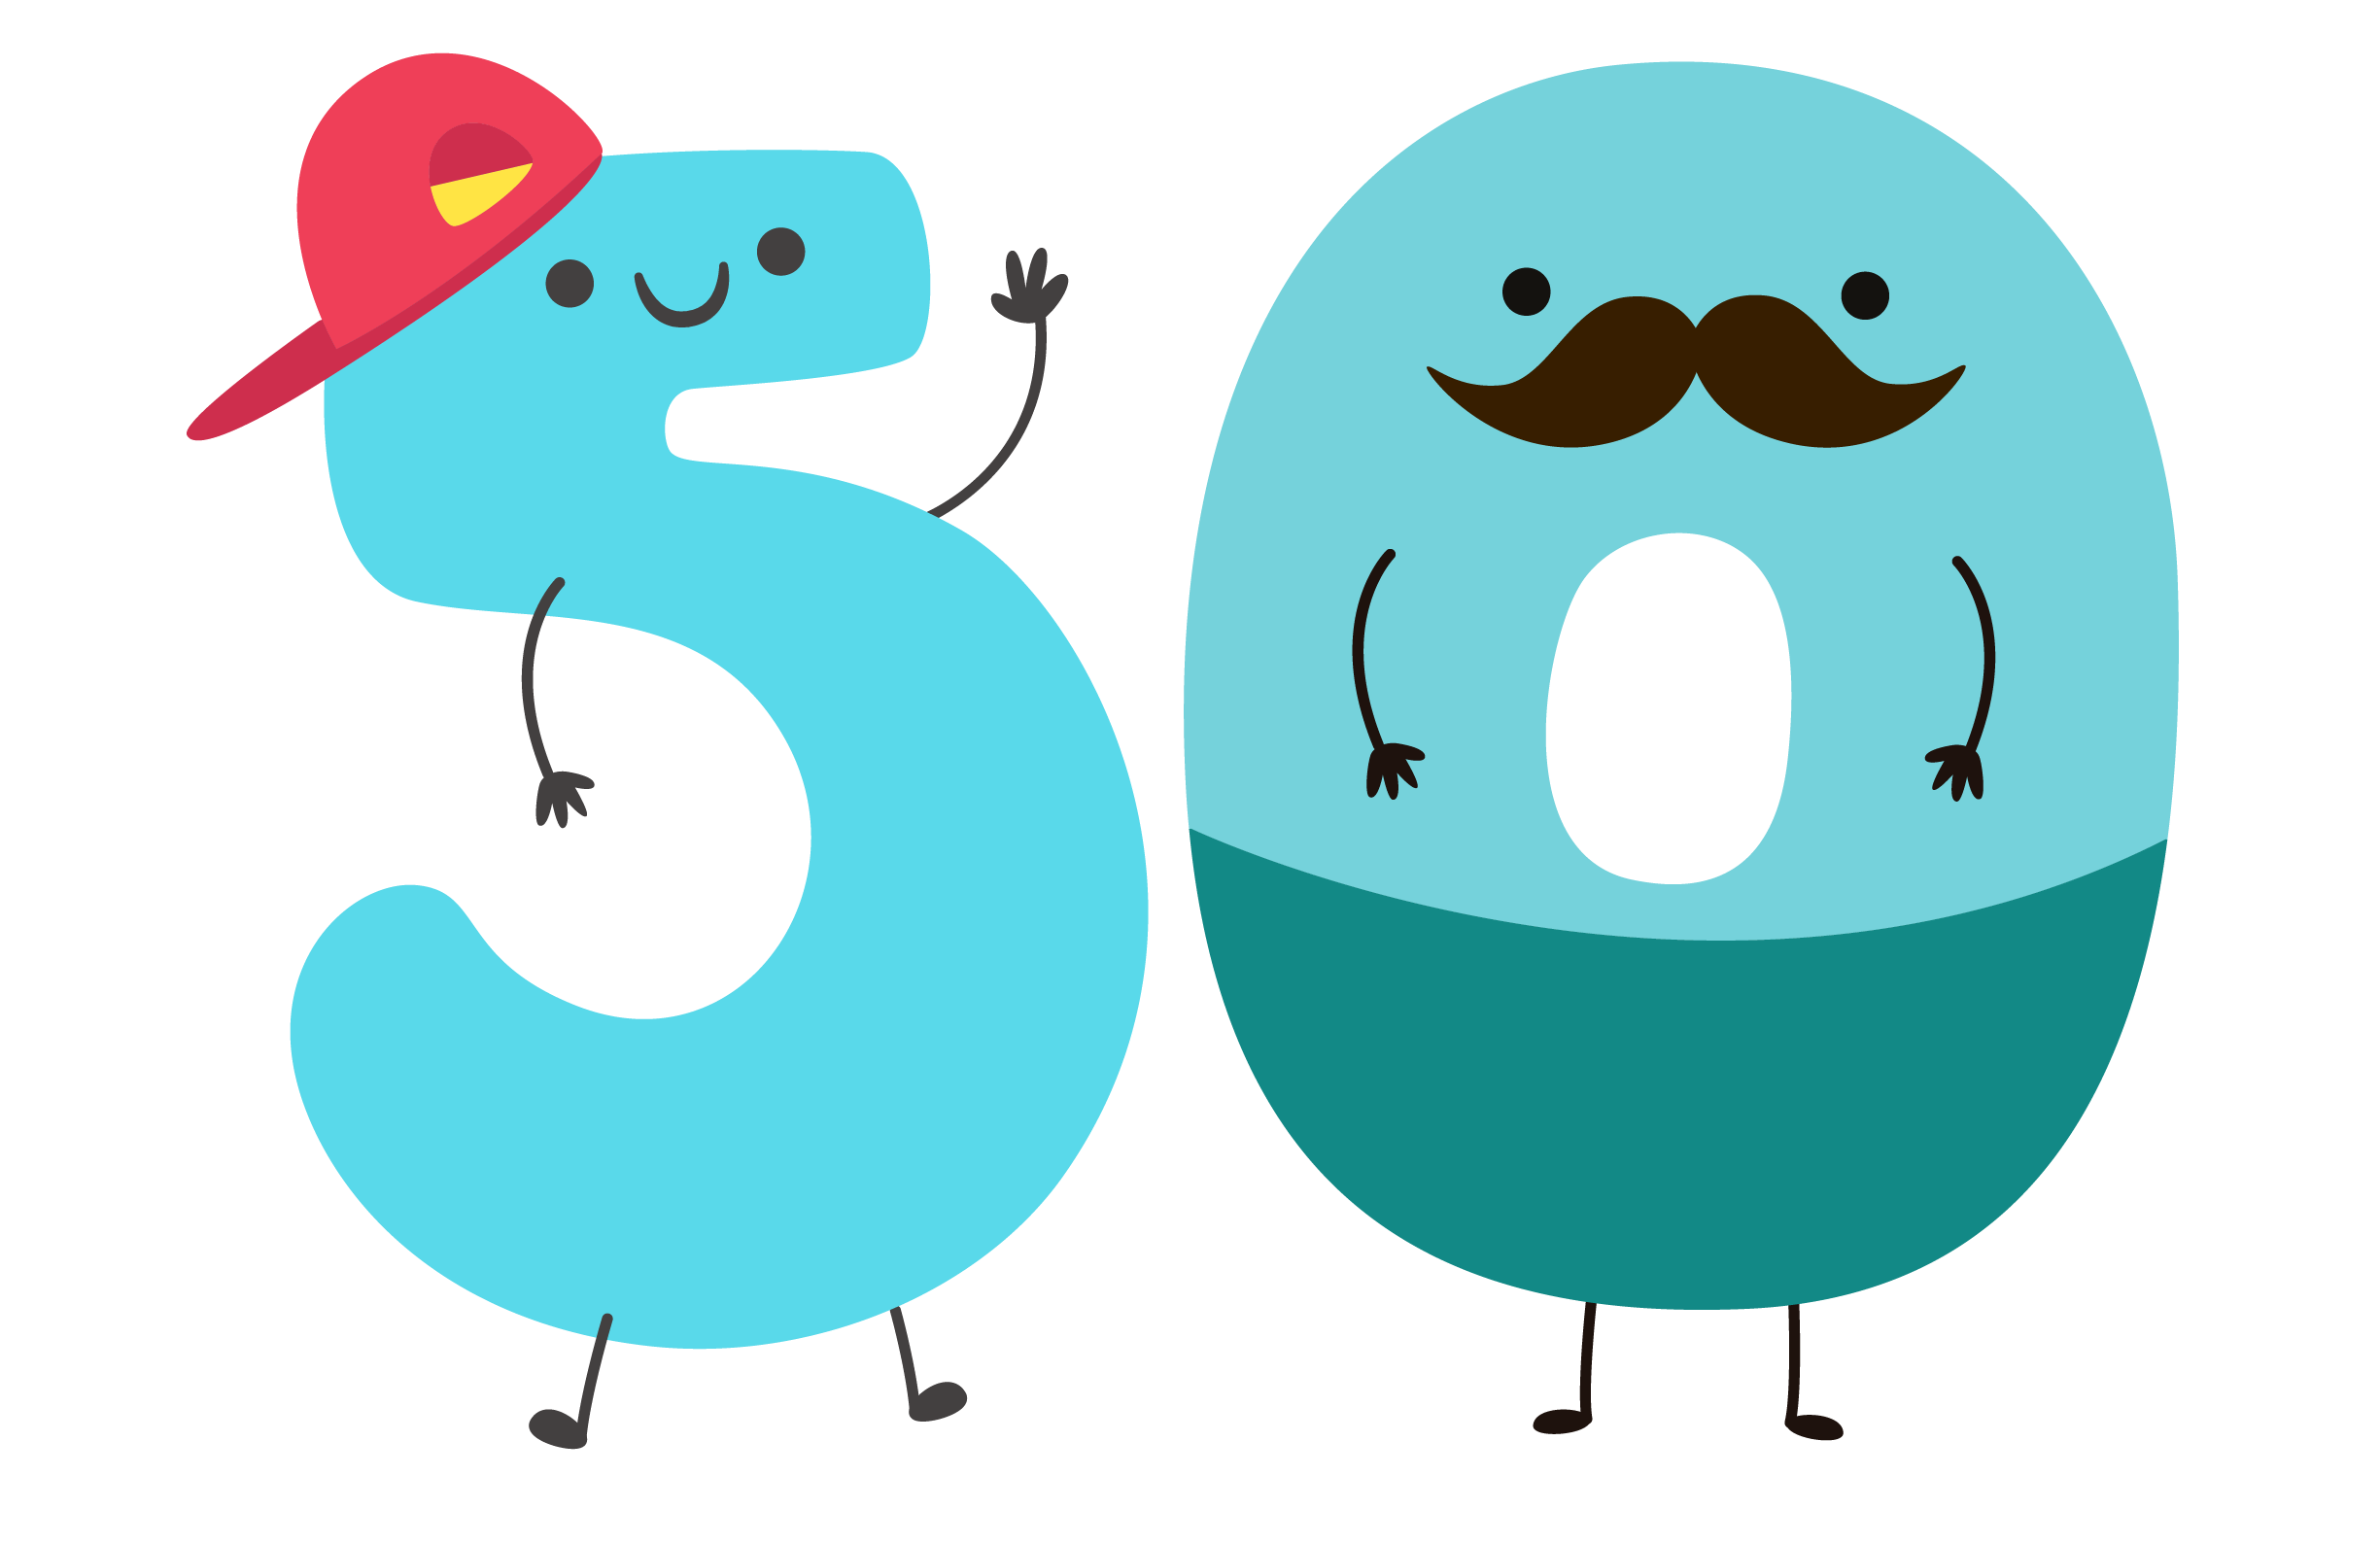 50 Number PNG HD Free Image